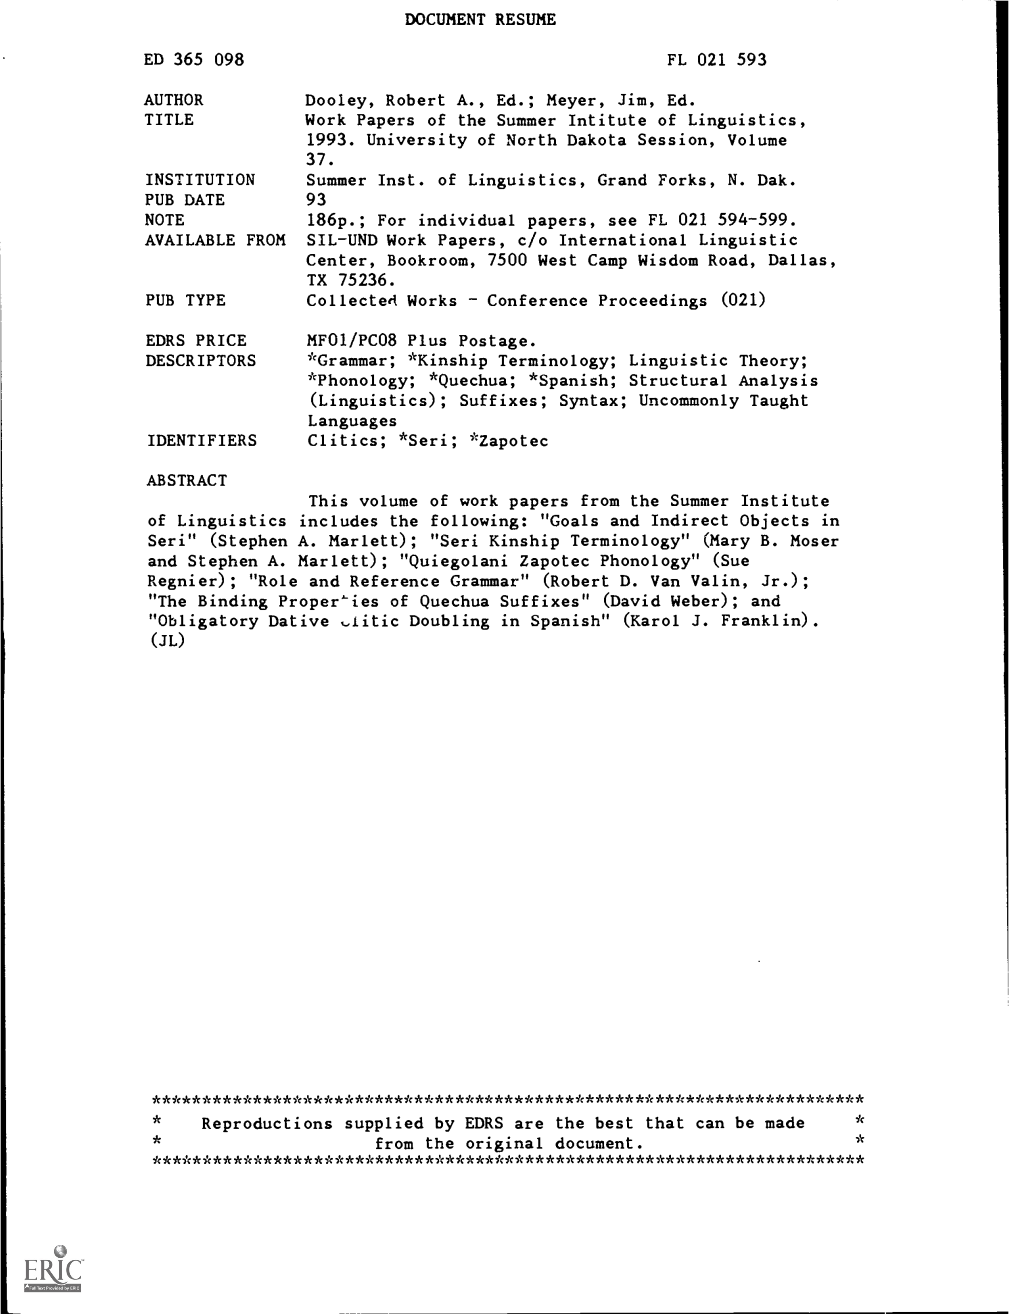 Work Papers of the Summer Intitute of Linguistics, 1993. University of North Dakota Session, Volume 37